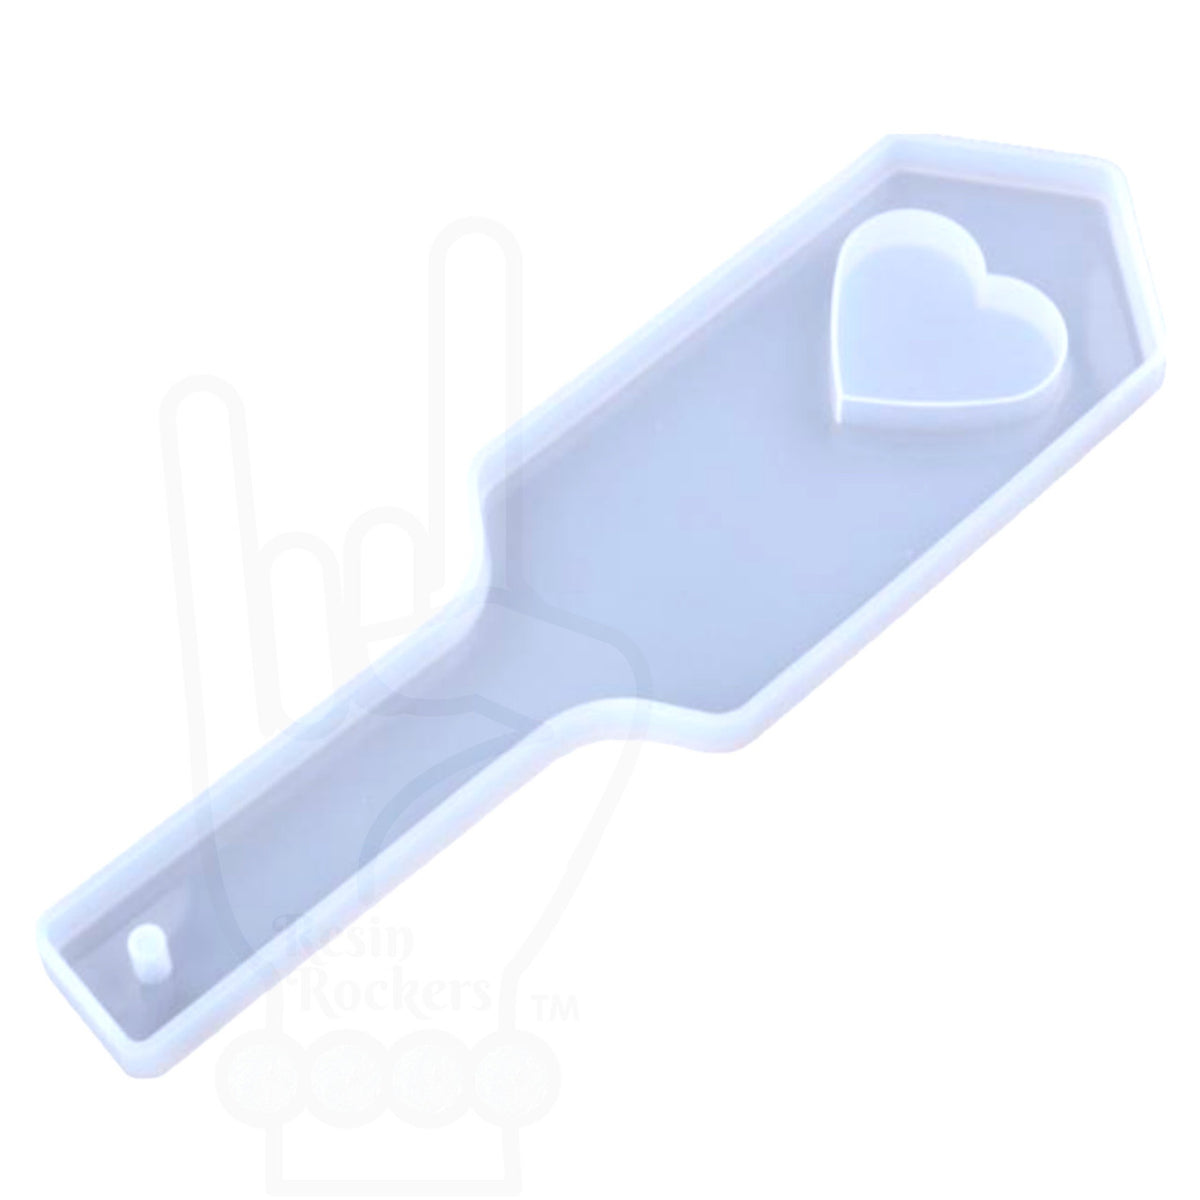 Adult Heart Paddle Silicone Mold for Epoxy Resin Art